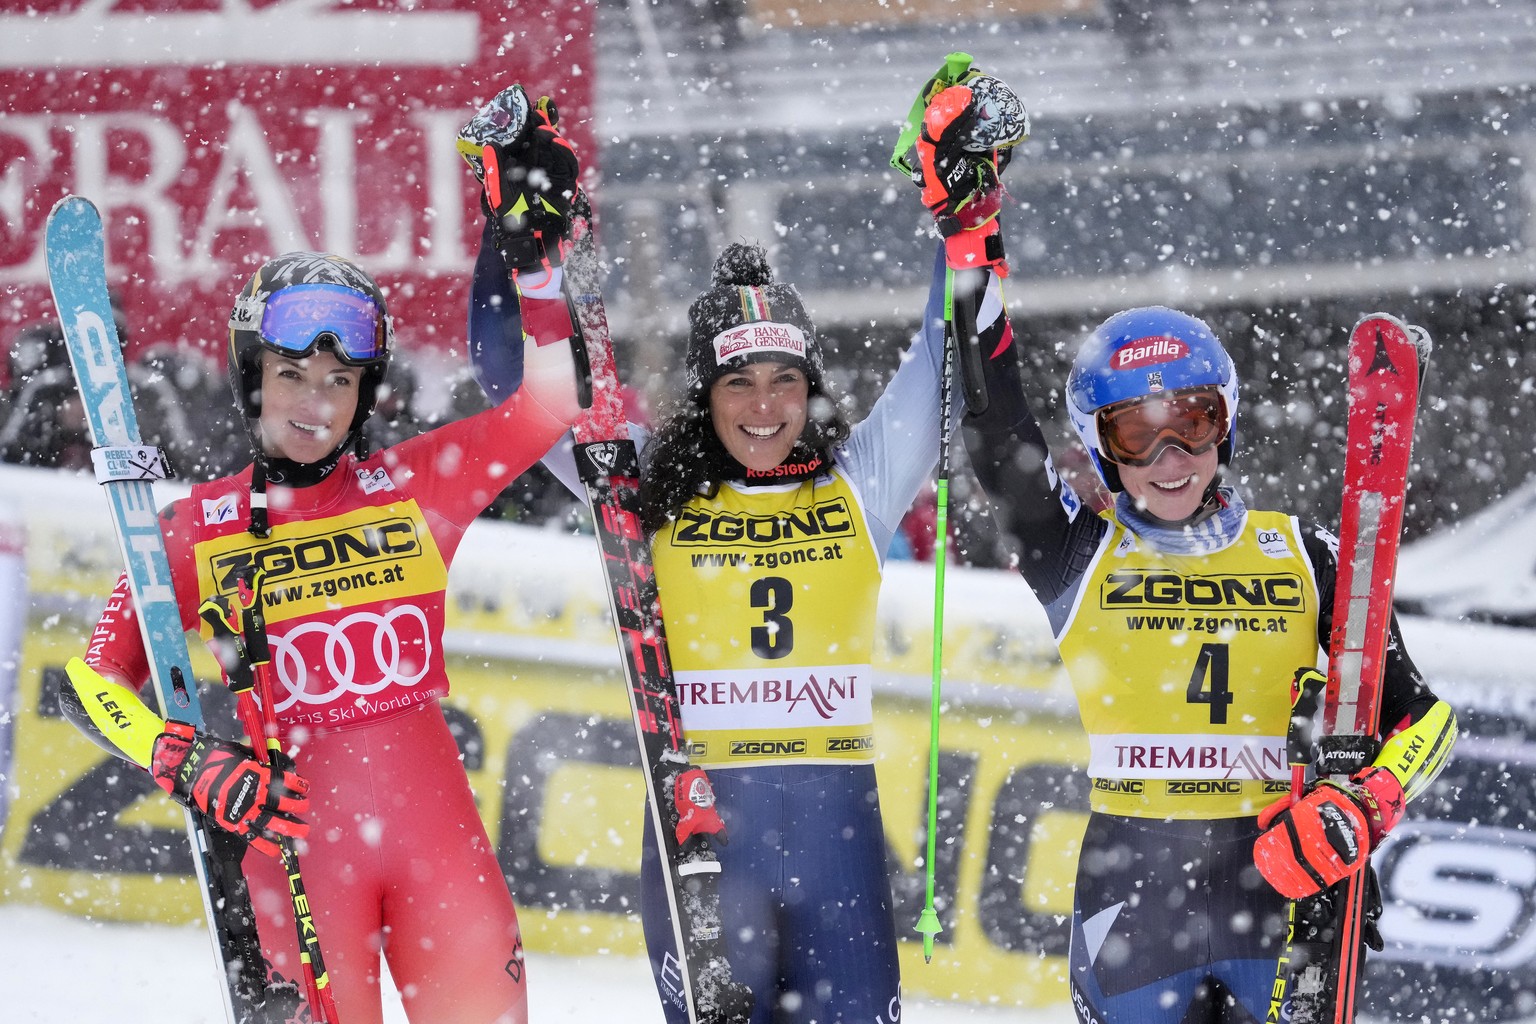 First place finisher Federica Brignone of Italy (3) raises hands together with second place Lara Gut-Behrami of Switzerland and third place Mikaela Shiffrin of the USA (4) at the end of the women&#039 ...